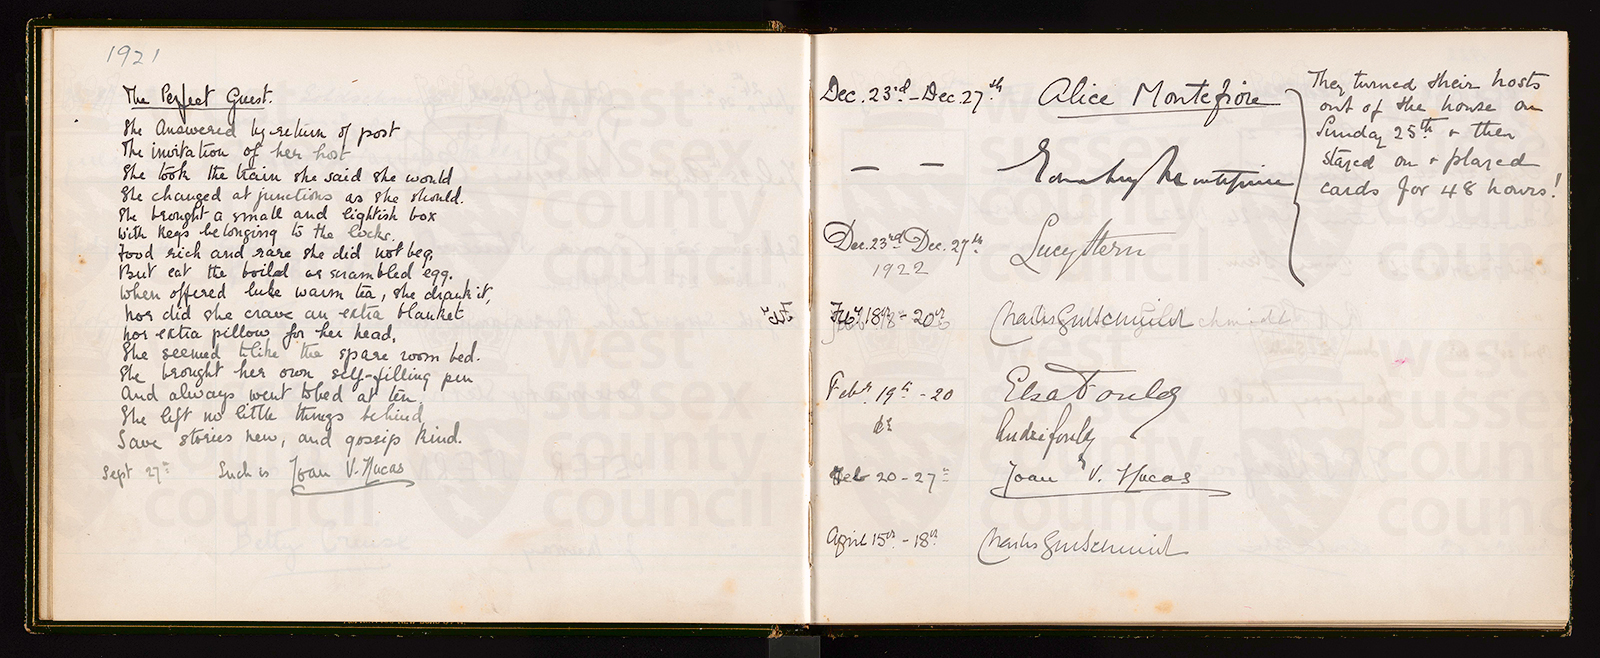 Host's Poem. Frederick's poem on his sister in law Joan' s visit, 27 Sept 1921. On top right page in December 1921 Alice and Edward Montefiore (card sharps) visit.